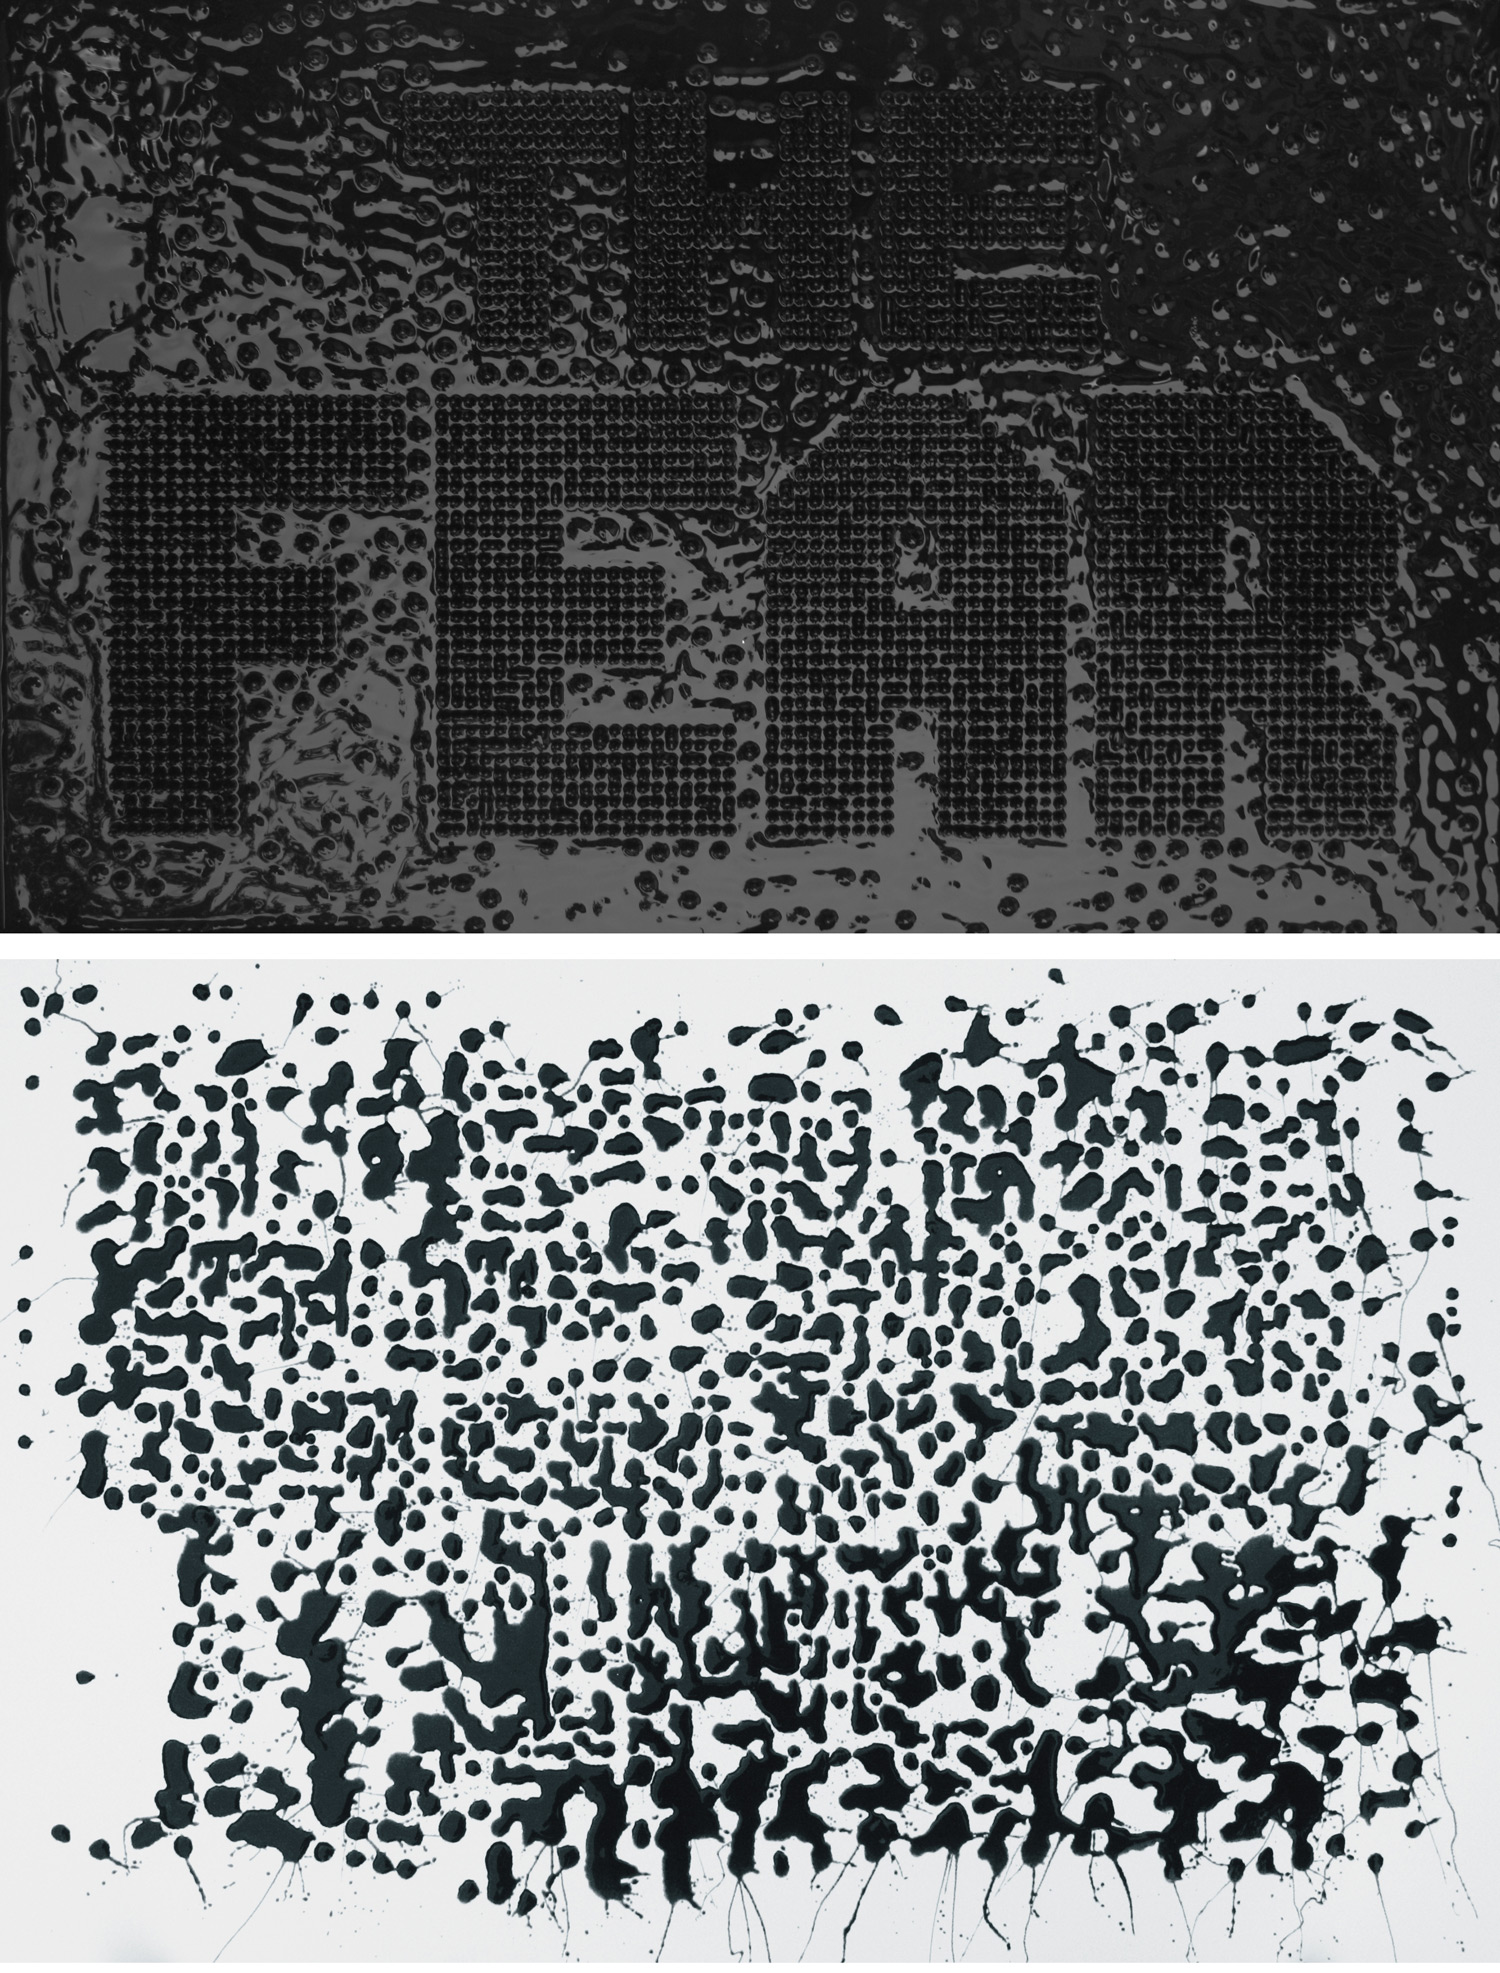 The fear I and II